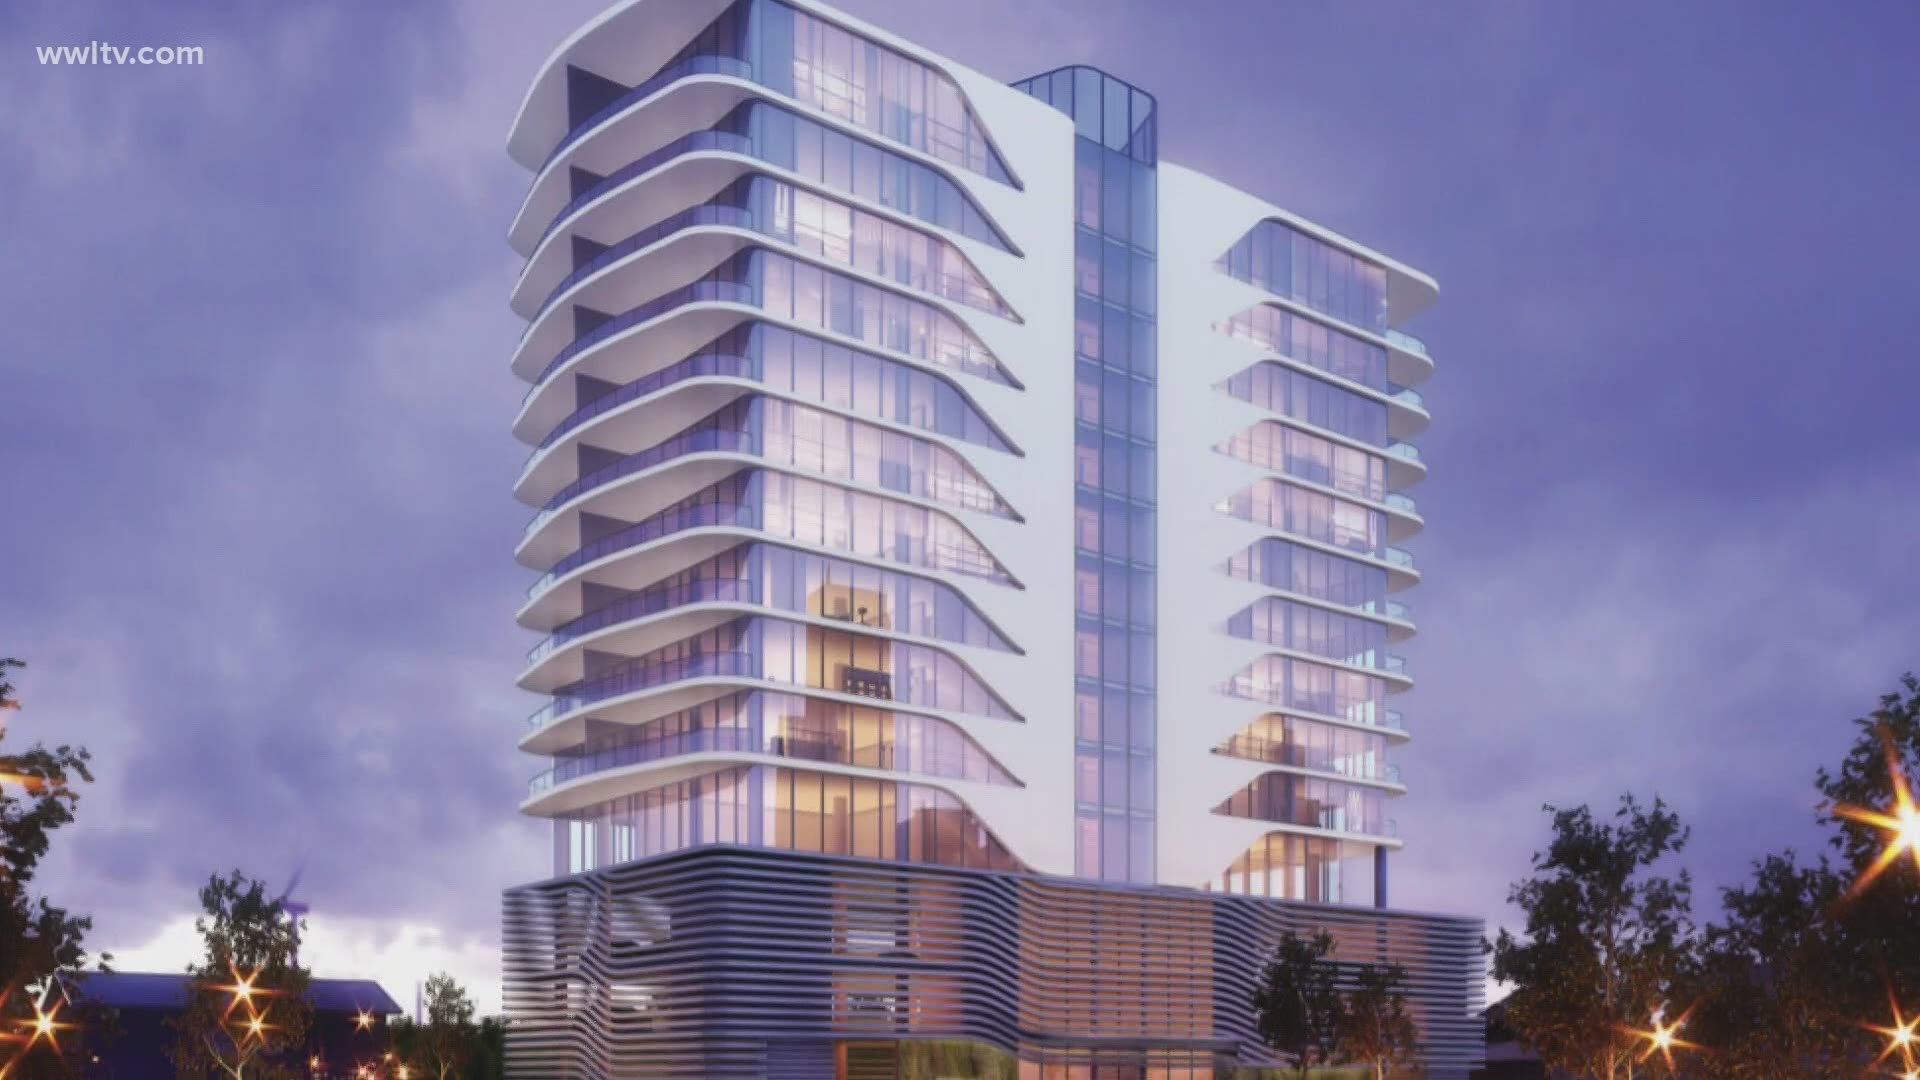 Developers are asking for permission to make The Pearl 166 feet tall, well above the allowed height of 65 feet.